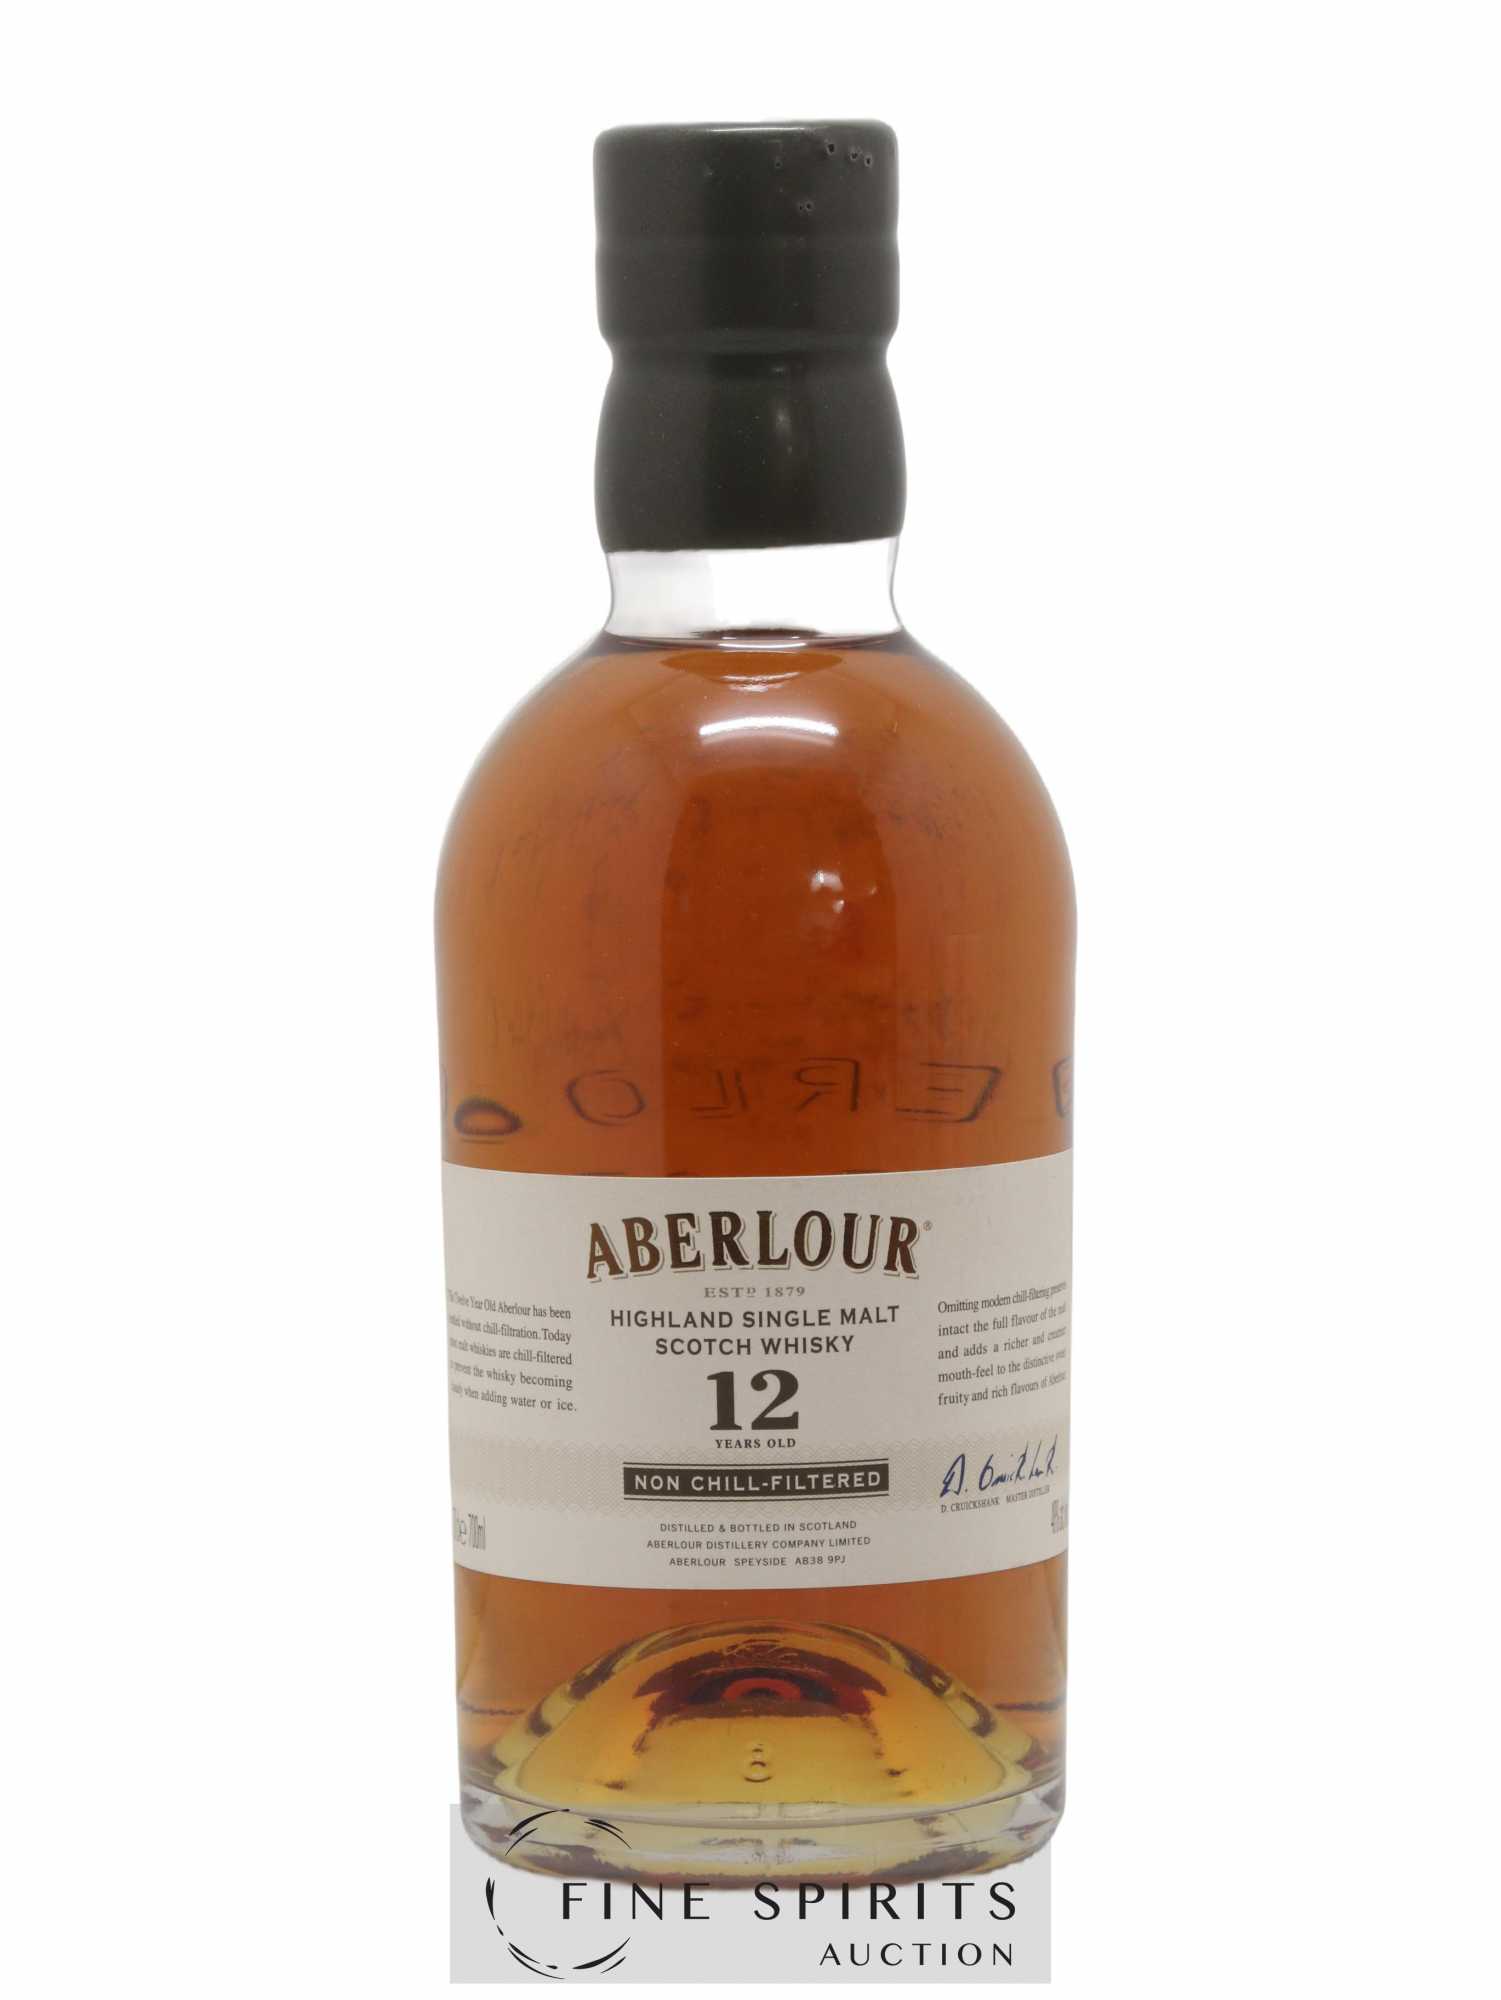 Aberlour 12 years Of. Non Chill-Filtered